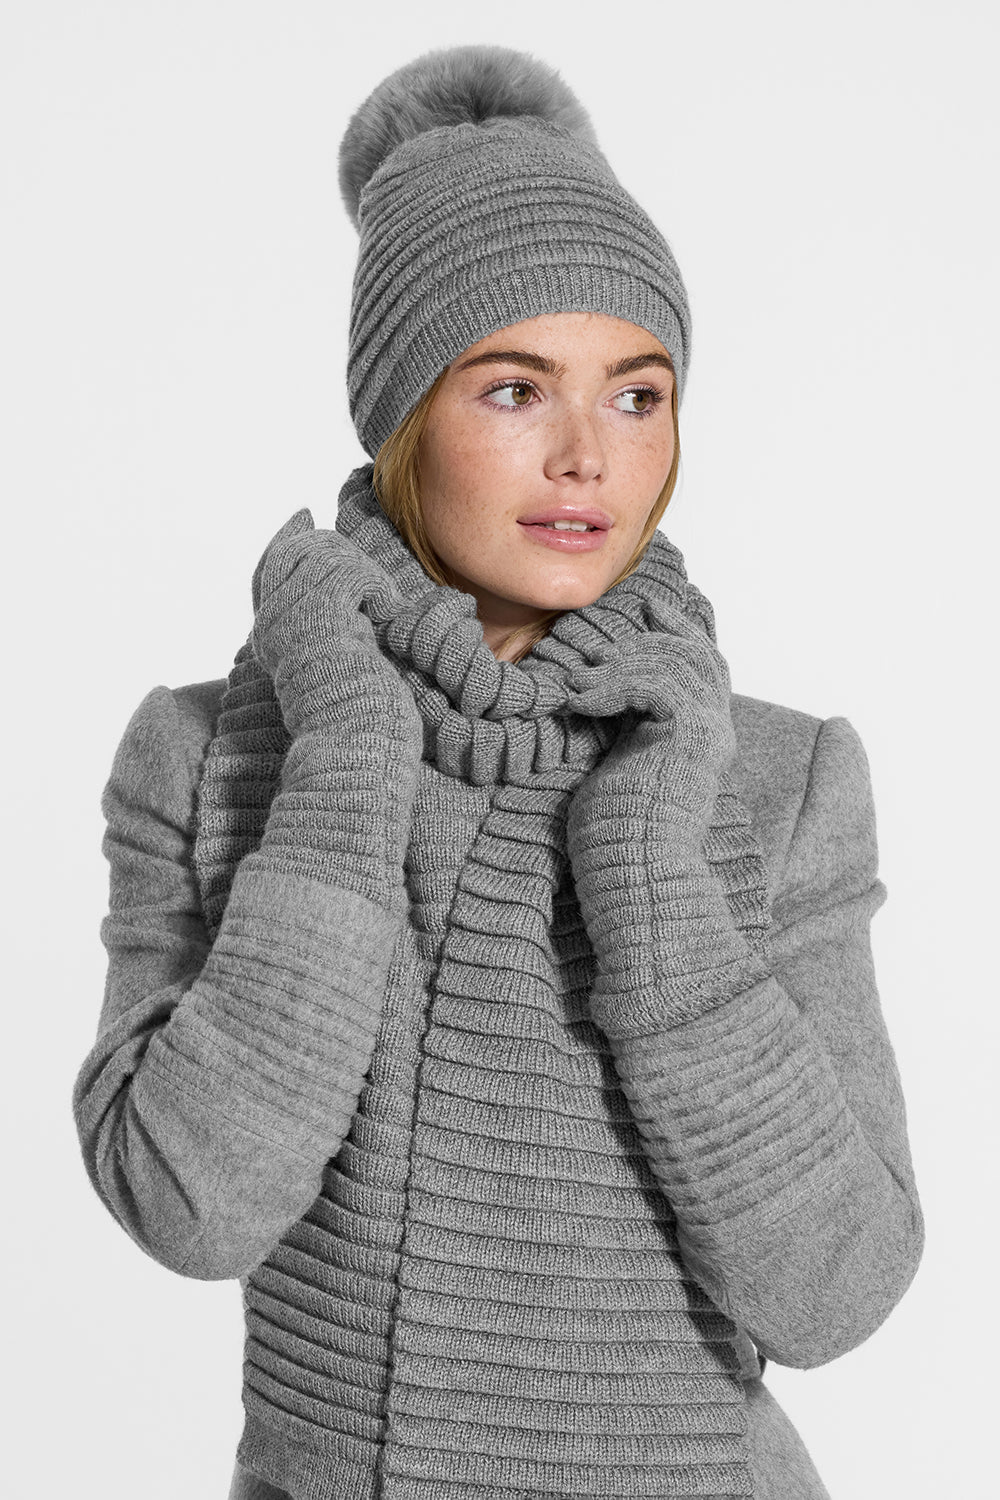 Knitted Cable Winter Scarf for Women, Long and Warm Italy